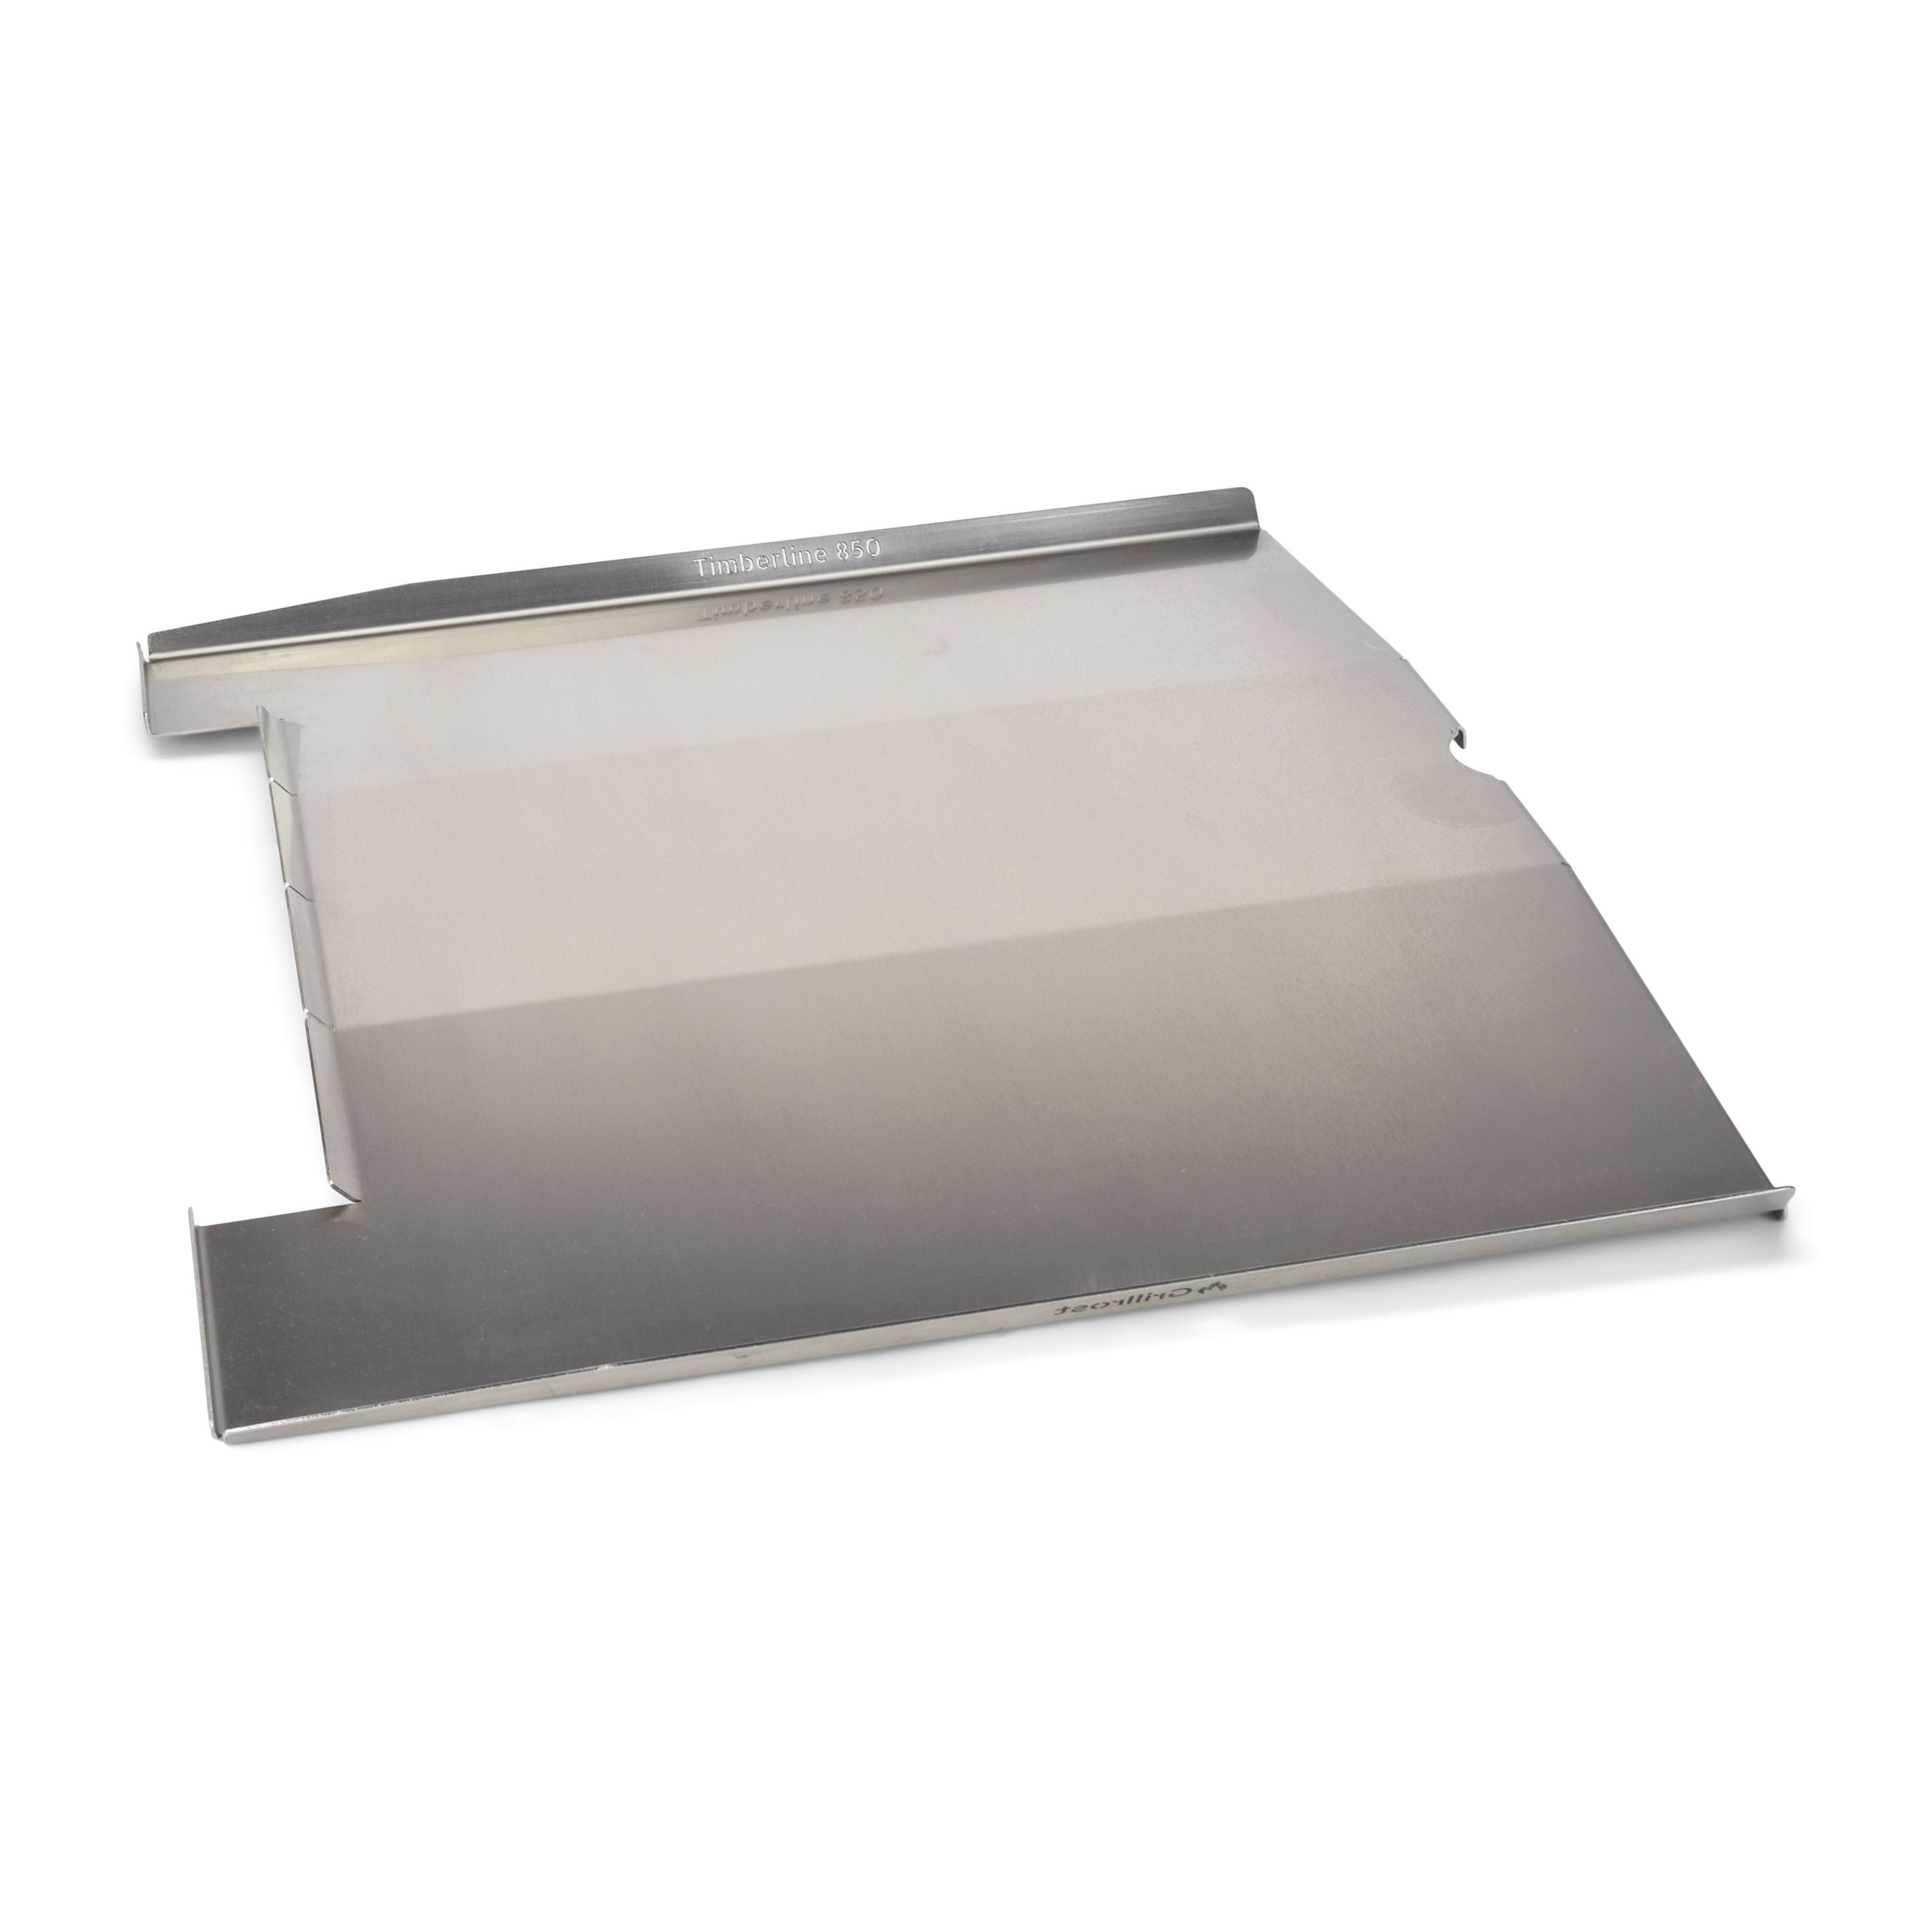 Stainless steel grease drain plate for carrier Timberline 850